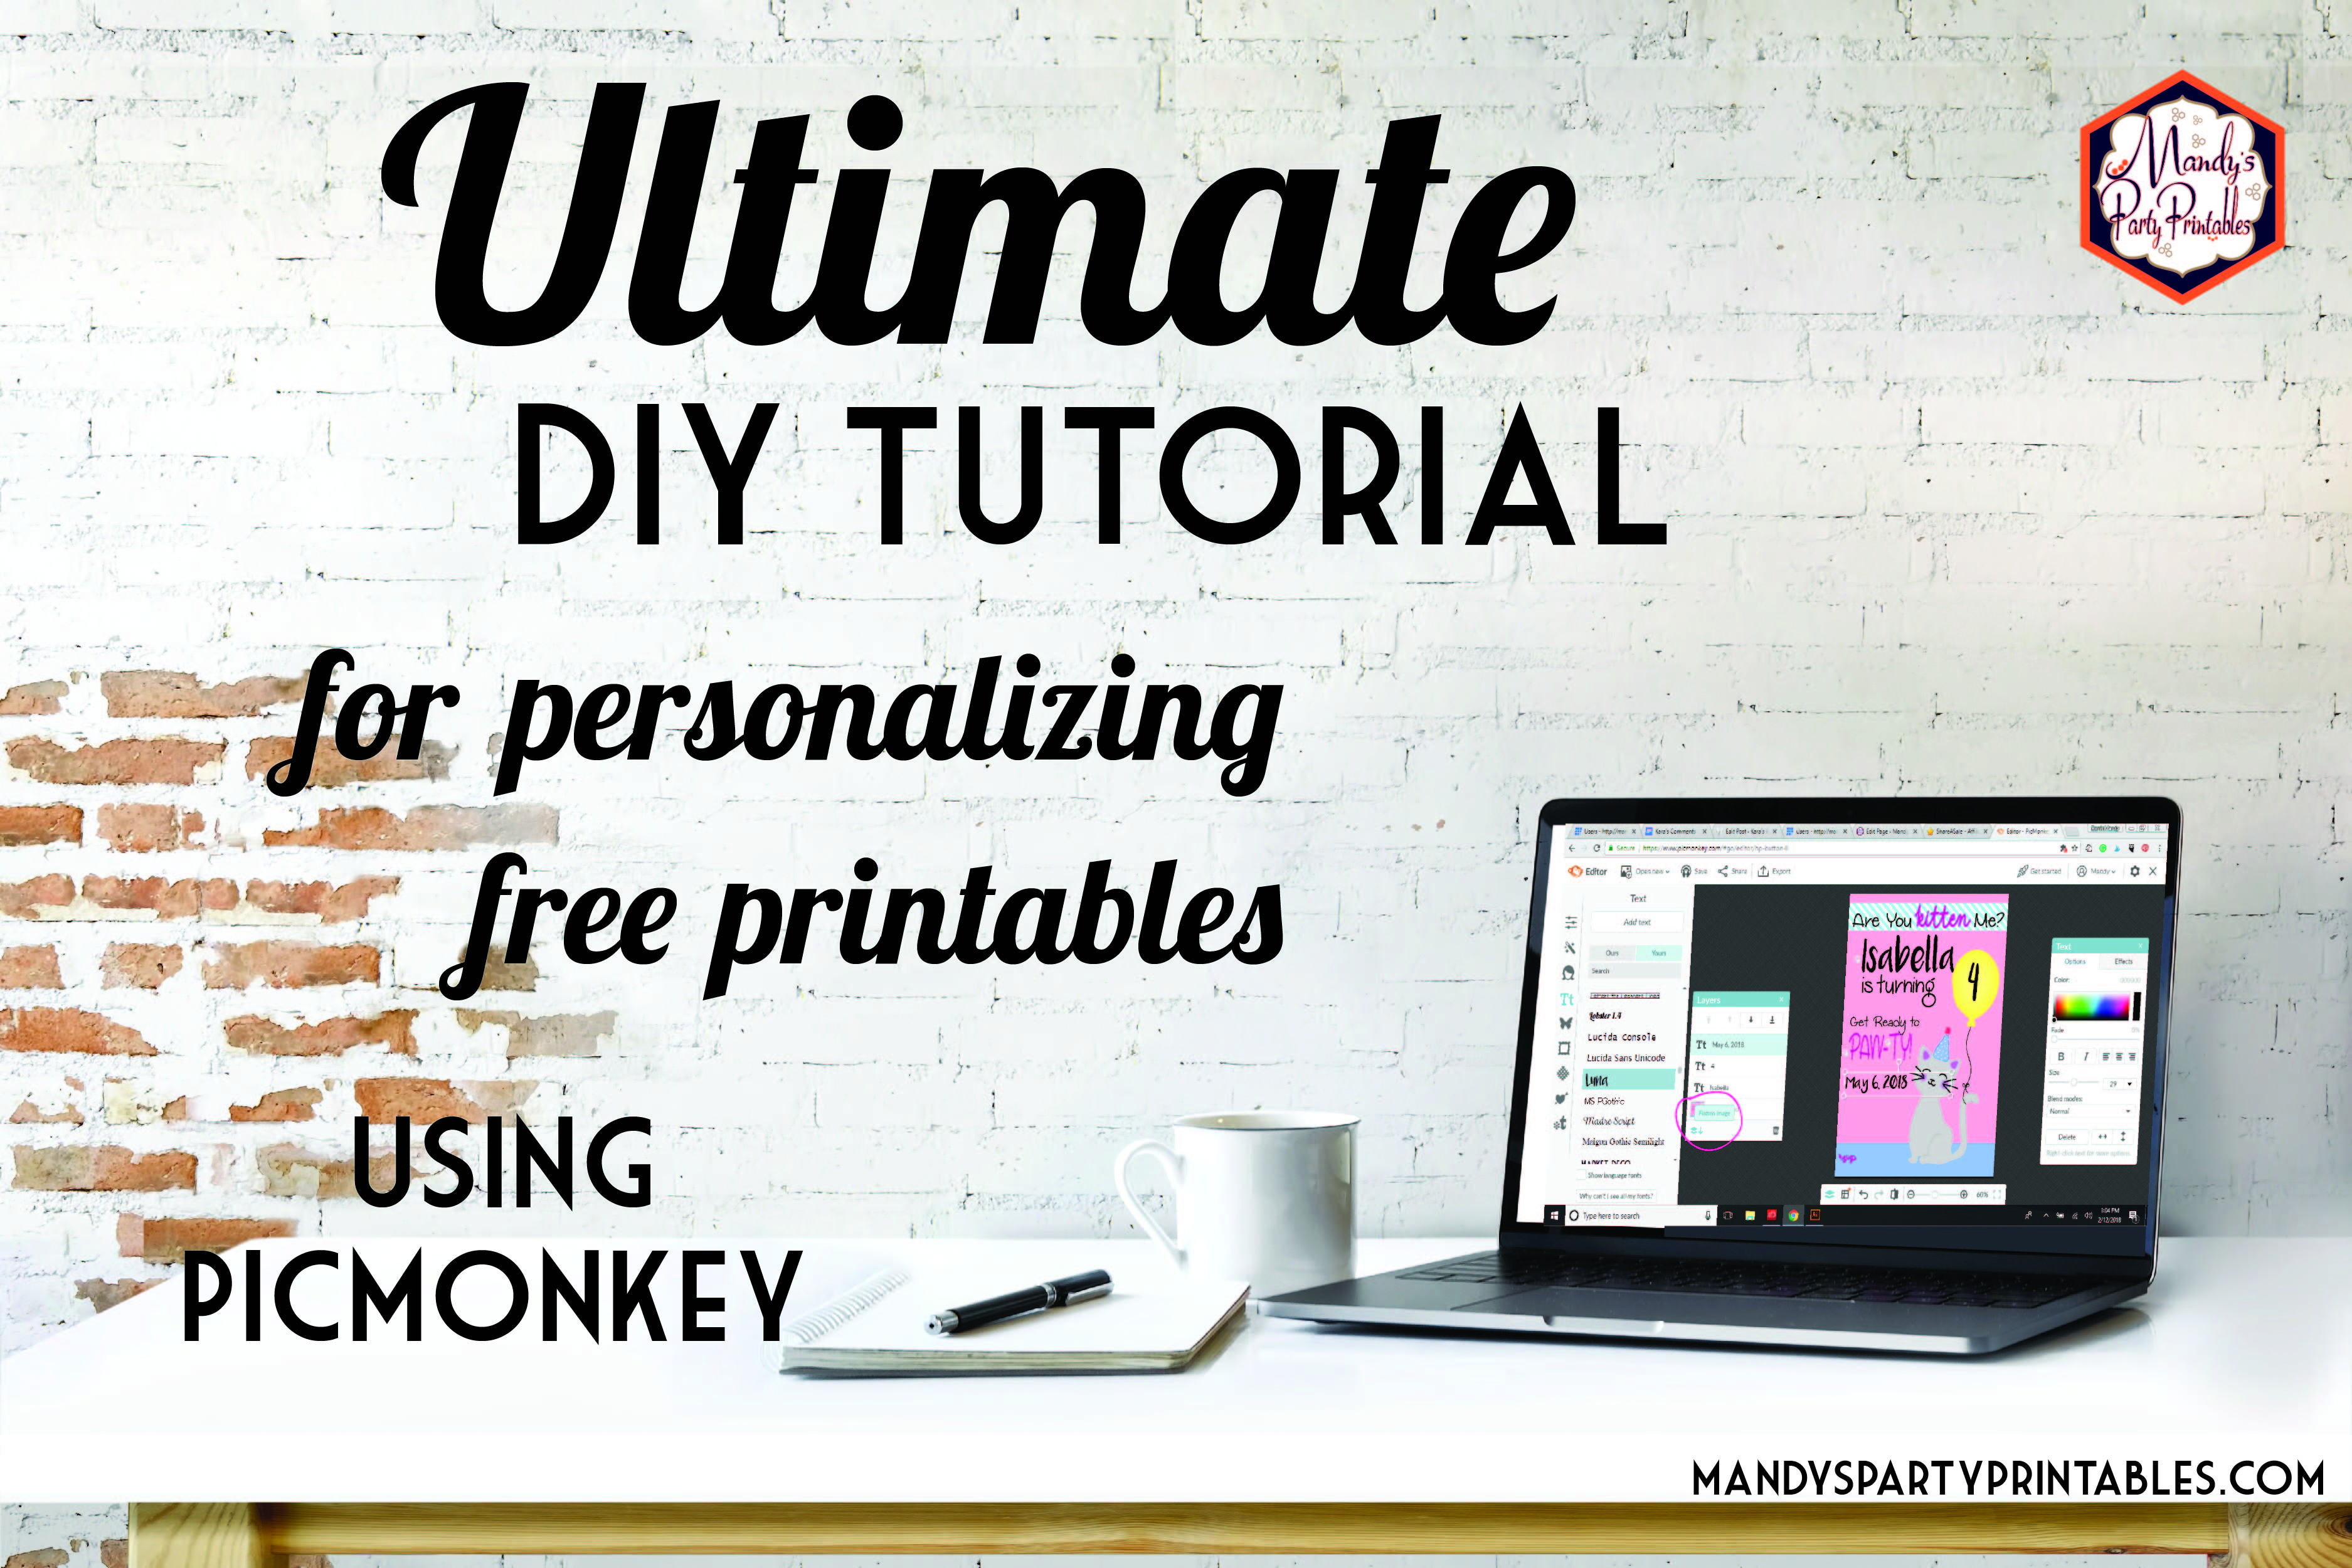 White desk with laptop, notebook, and coffee against a white washed brick wall with the words "Ultimate DIY Tutorial for personalizing free printables using PicMonkey | Mandy's Party Printables